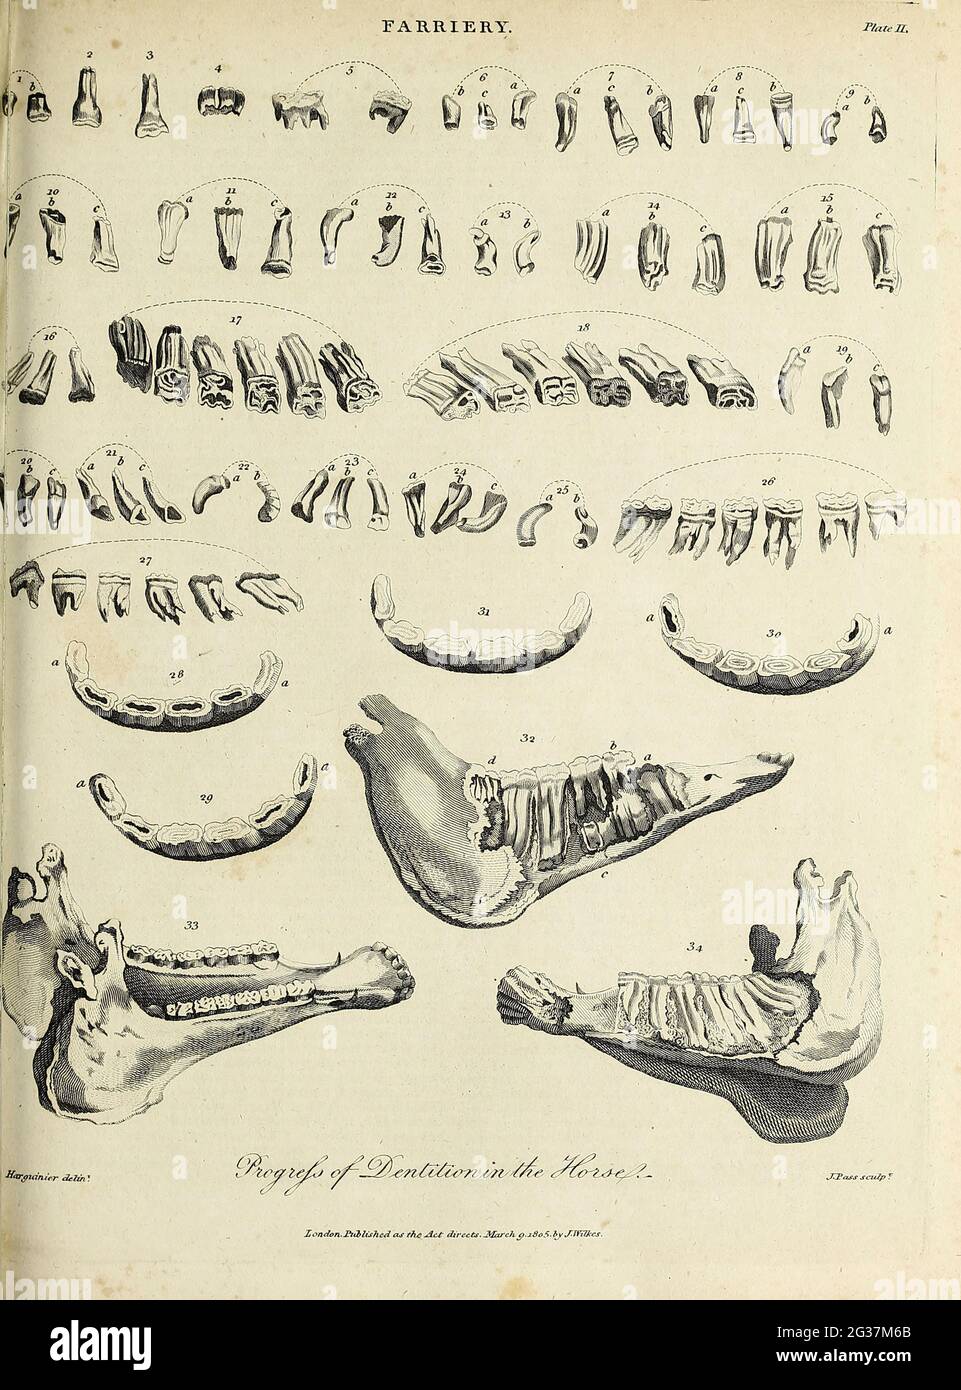 Progress of the Dentition in the Horse  Copperplate engraving From the Encyclopaedia Londinensis or, Universal dictionary of arts, sciences, and literature; Volume VII;  Edited by Wilkes, John. Published in London in 1810 Stock Photo